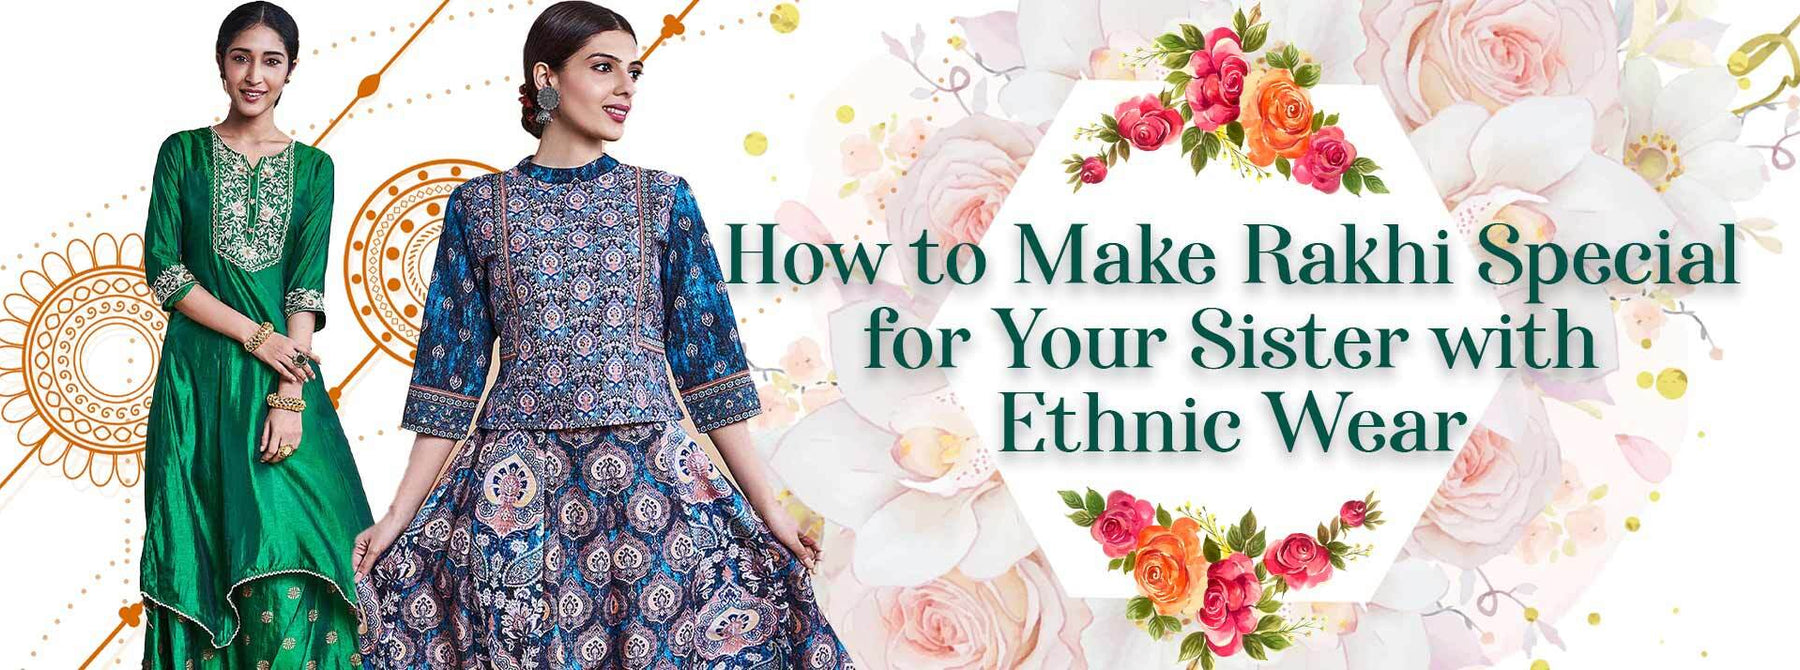 Remarkable Ethnic Wear You Can Gift Your Sister